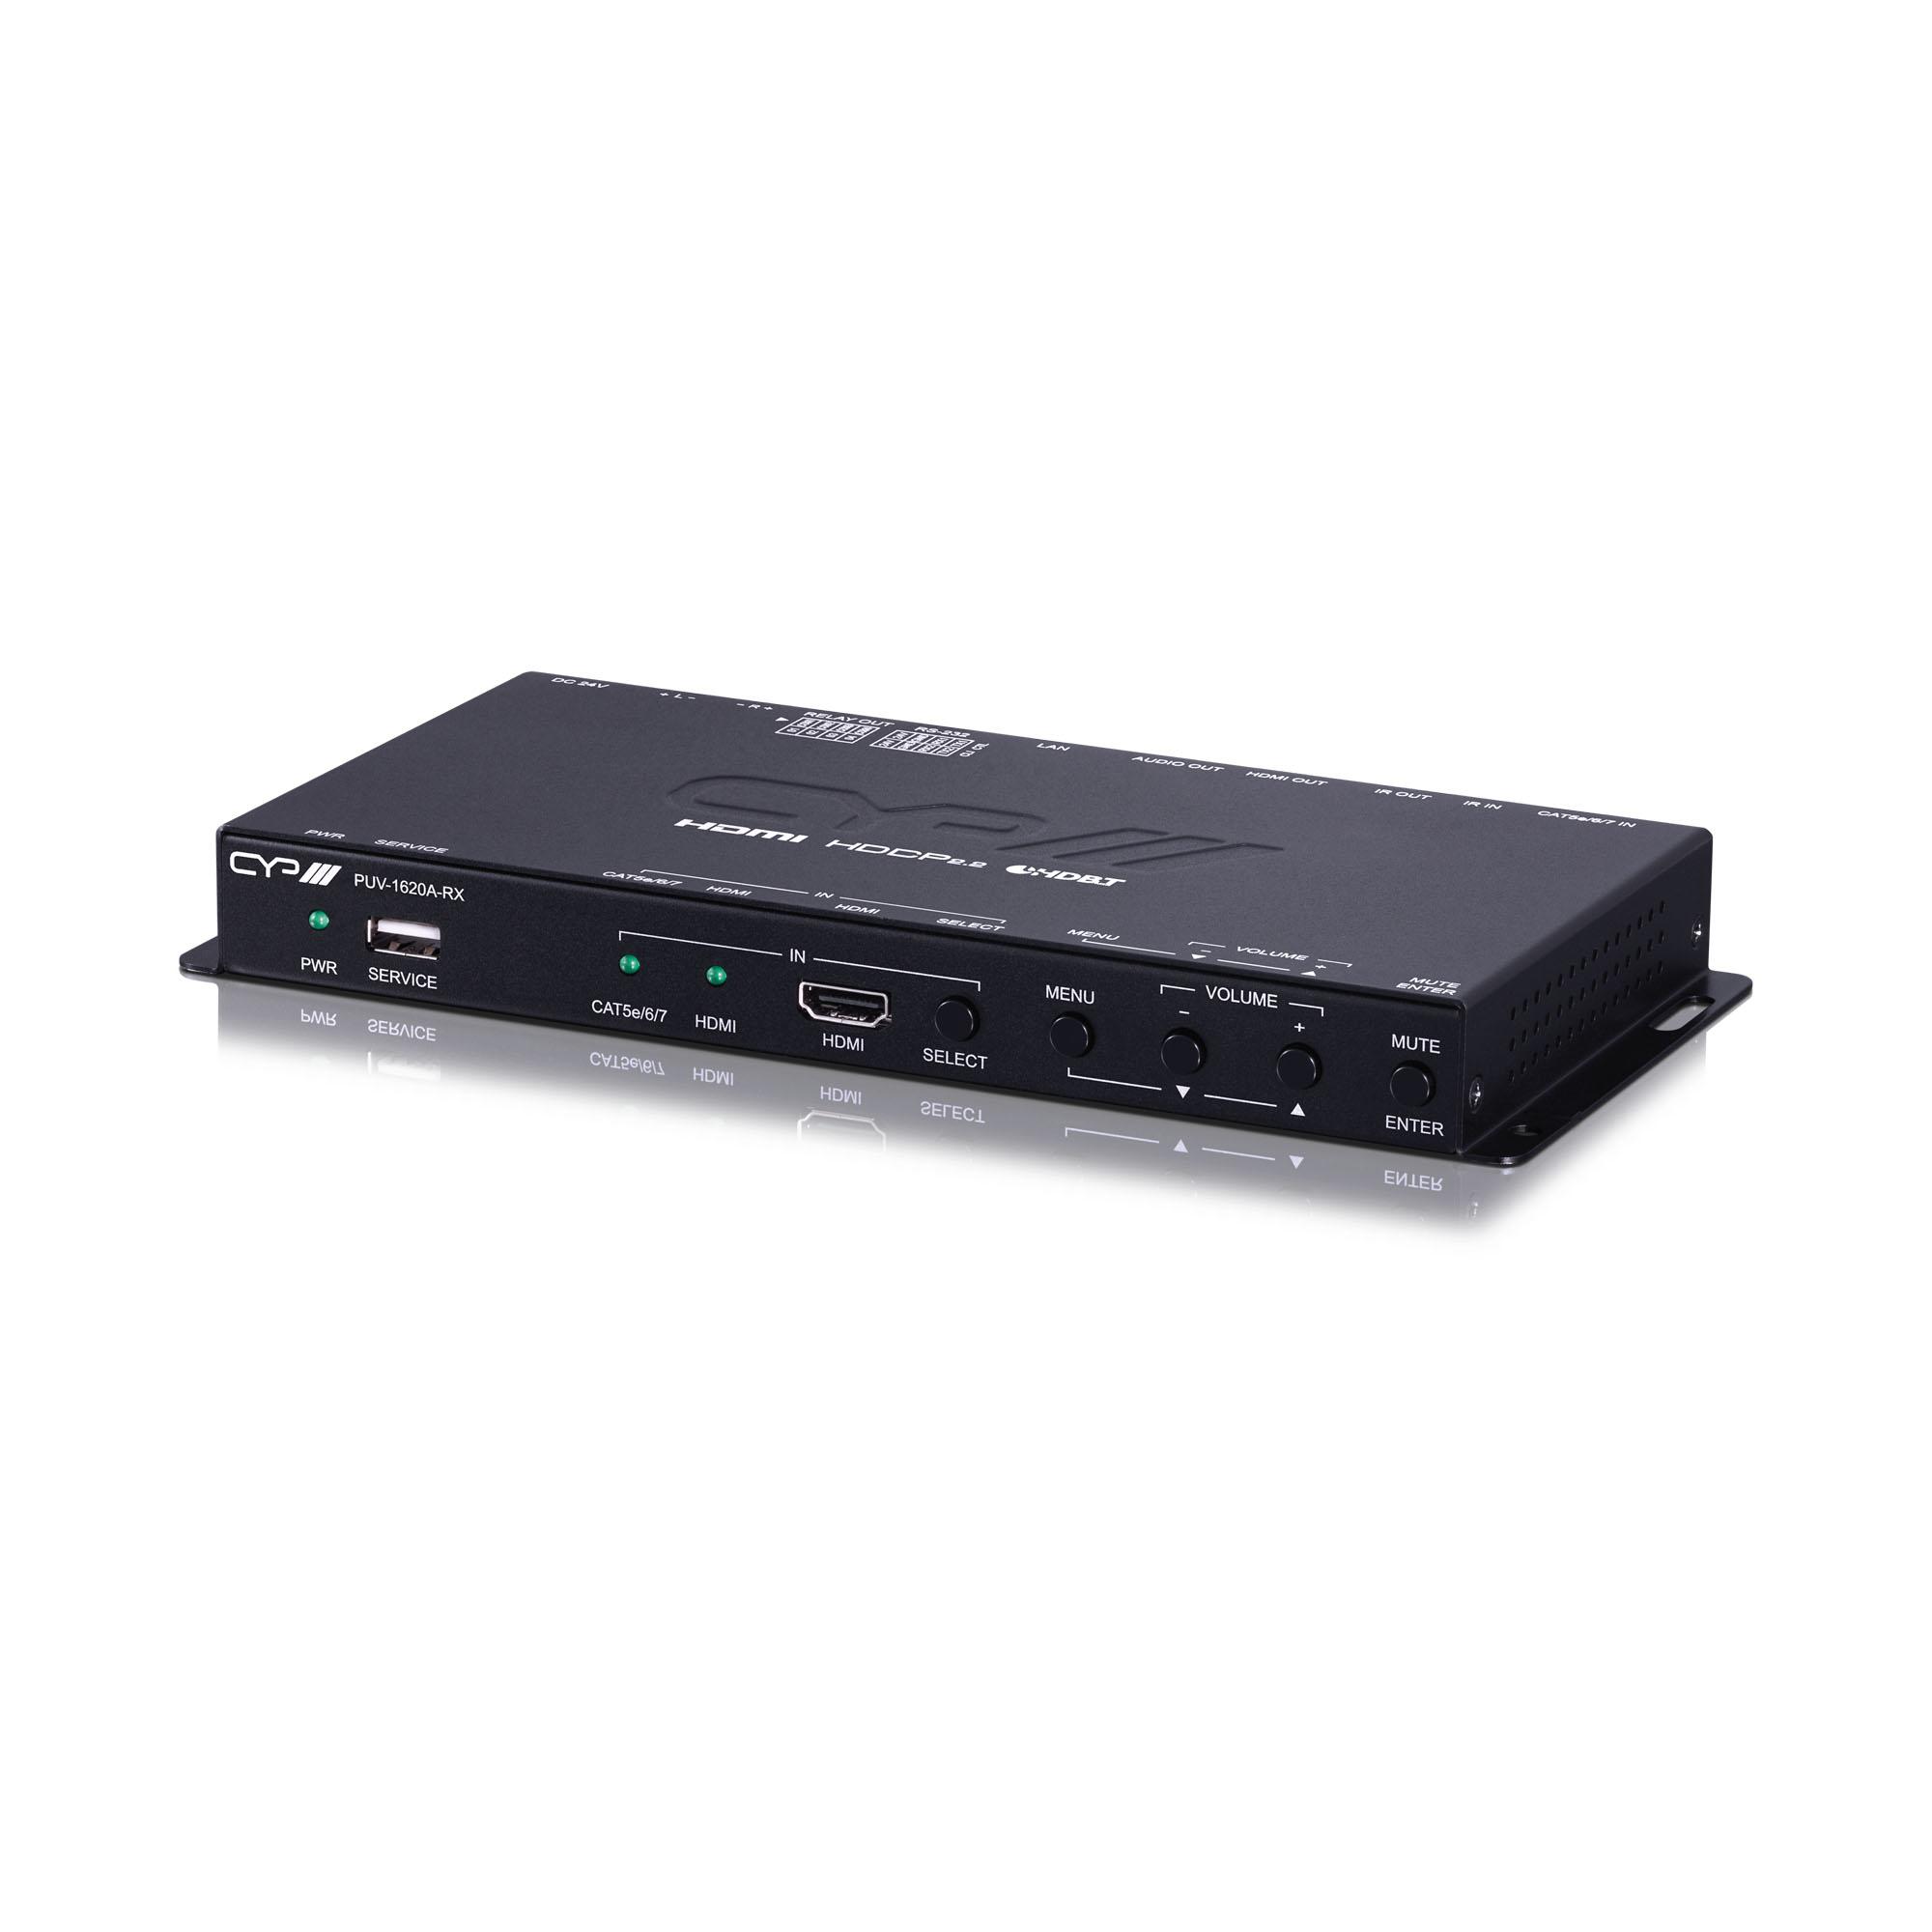 PUV-1620A-RX HDMI over Single CAT5e/6/7 HDBaseT™ Receiver (full 5-Play™ & Single LAN up to 100m, PoH) with Audio Amplifier